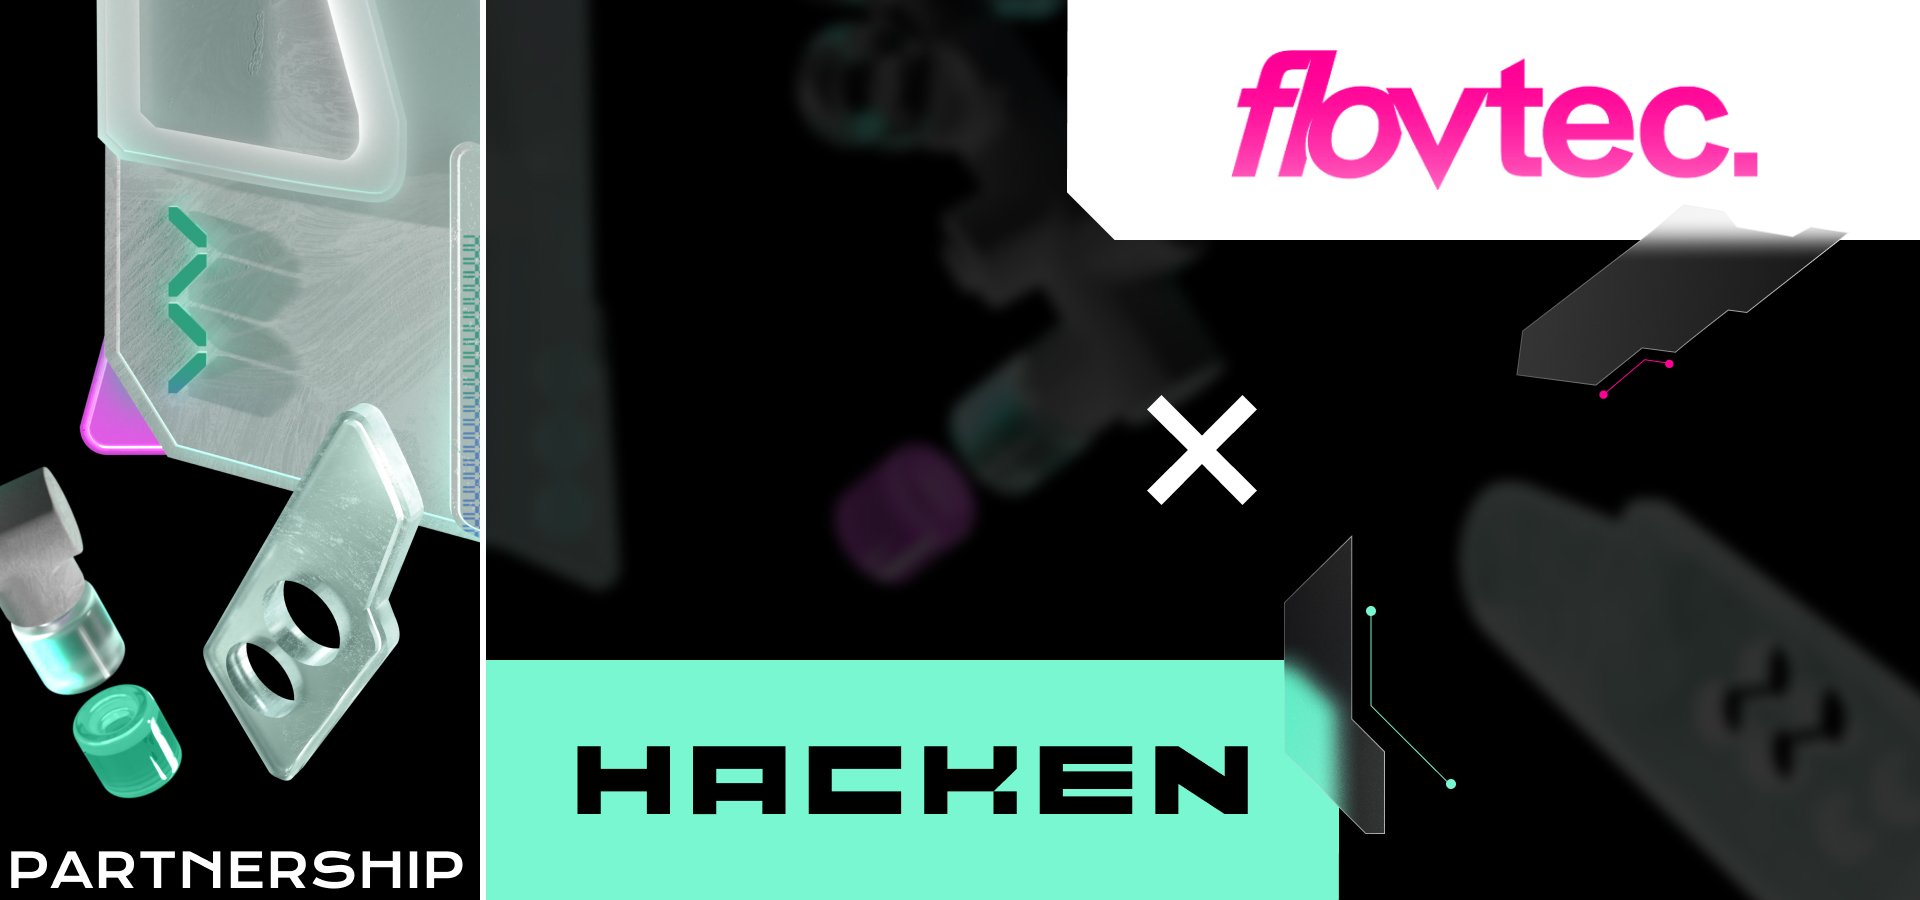 Flovtec partners with Hacken to secure its leading market-making solution